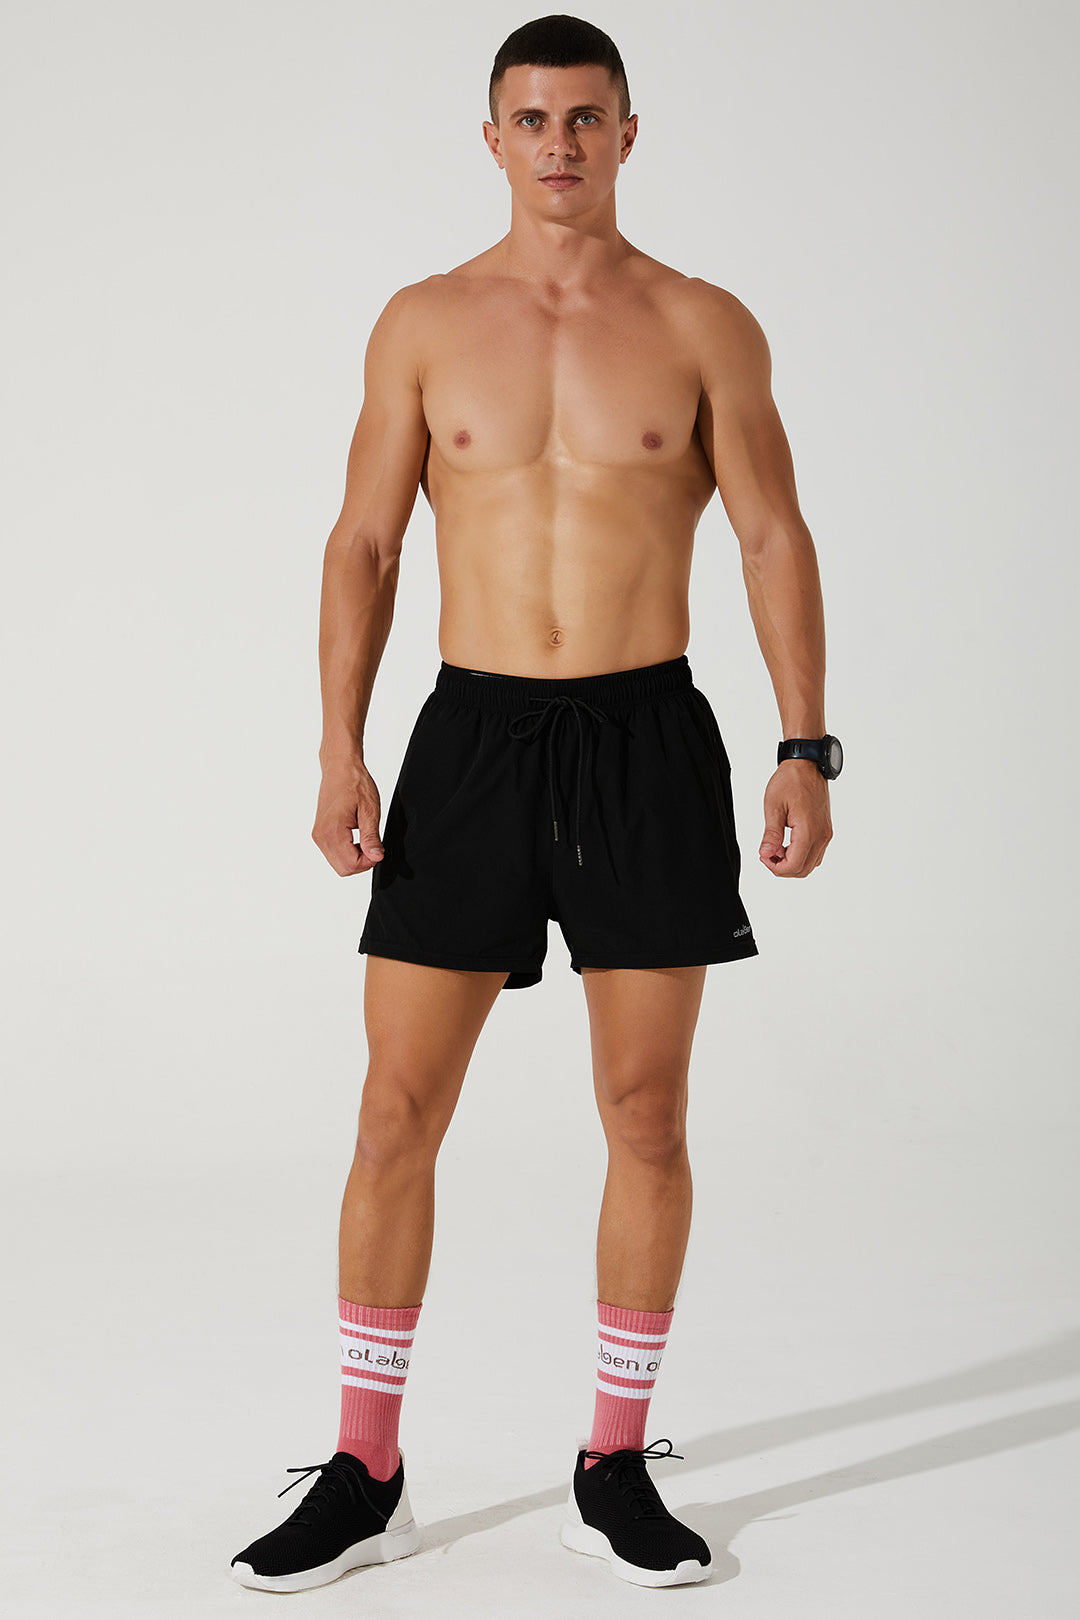 Black running shorts for men, perfect for adapting to any workout. OW-0015-MSH-BK.